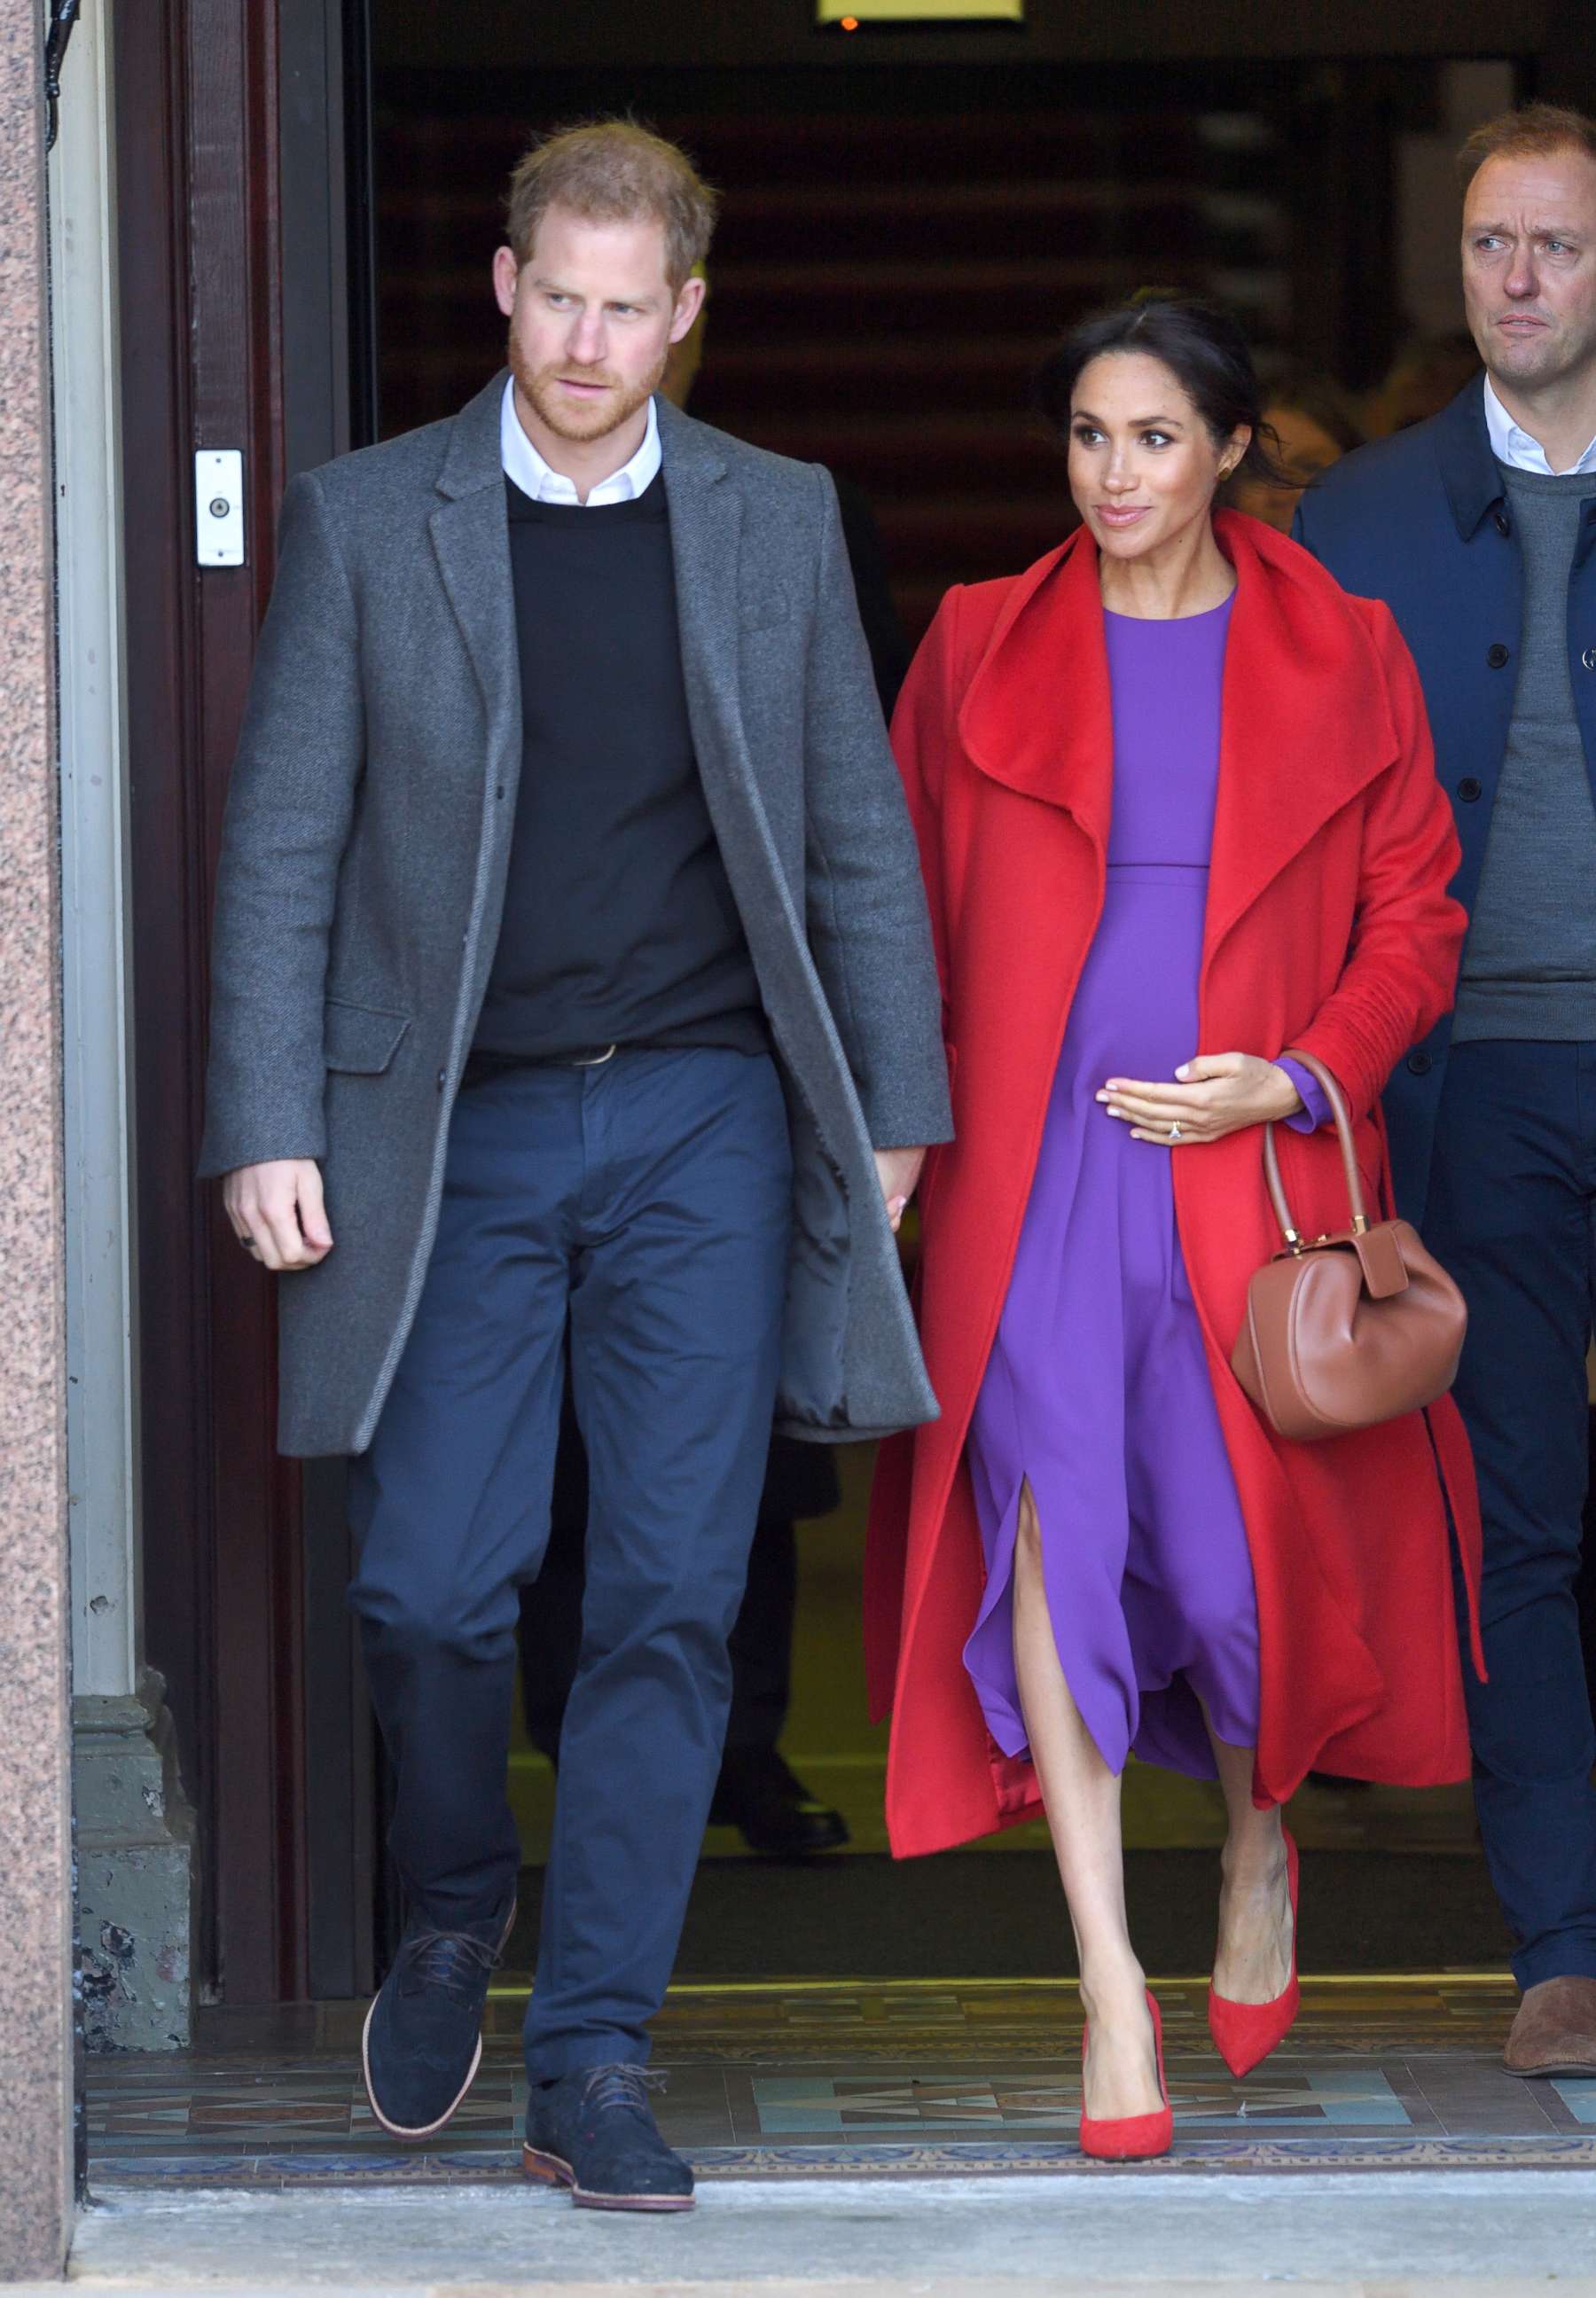 PHOTO: Prince Harry, Duke of Sussex and Meghan, Duchess of Sussex meet members of the public during a visit of Birkenhead at Hamilton Square on Jan. 14, 2019, in Birkenhead, U.K.